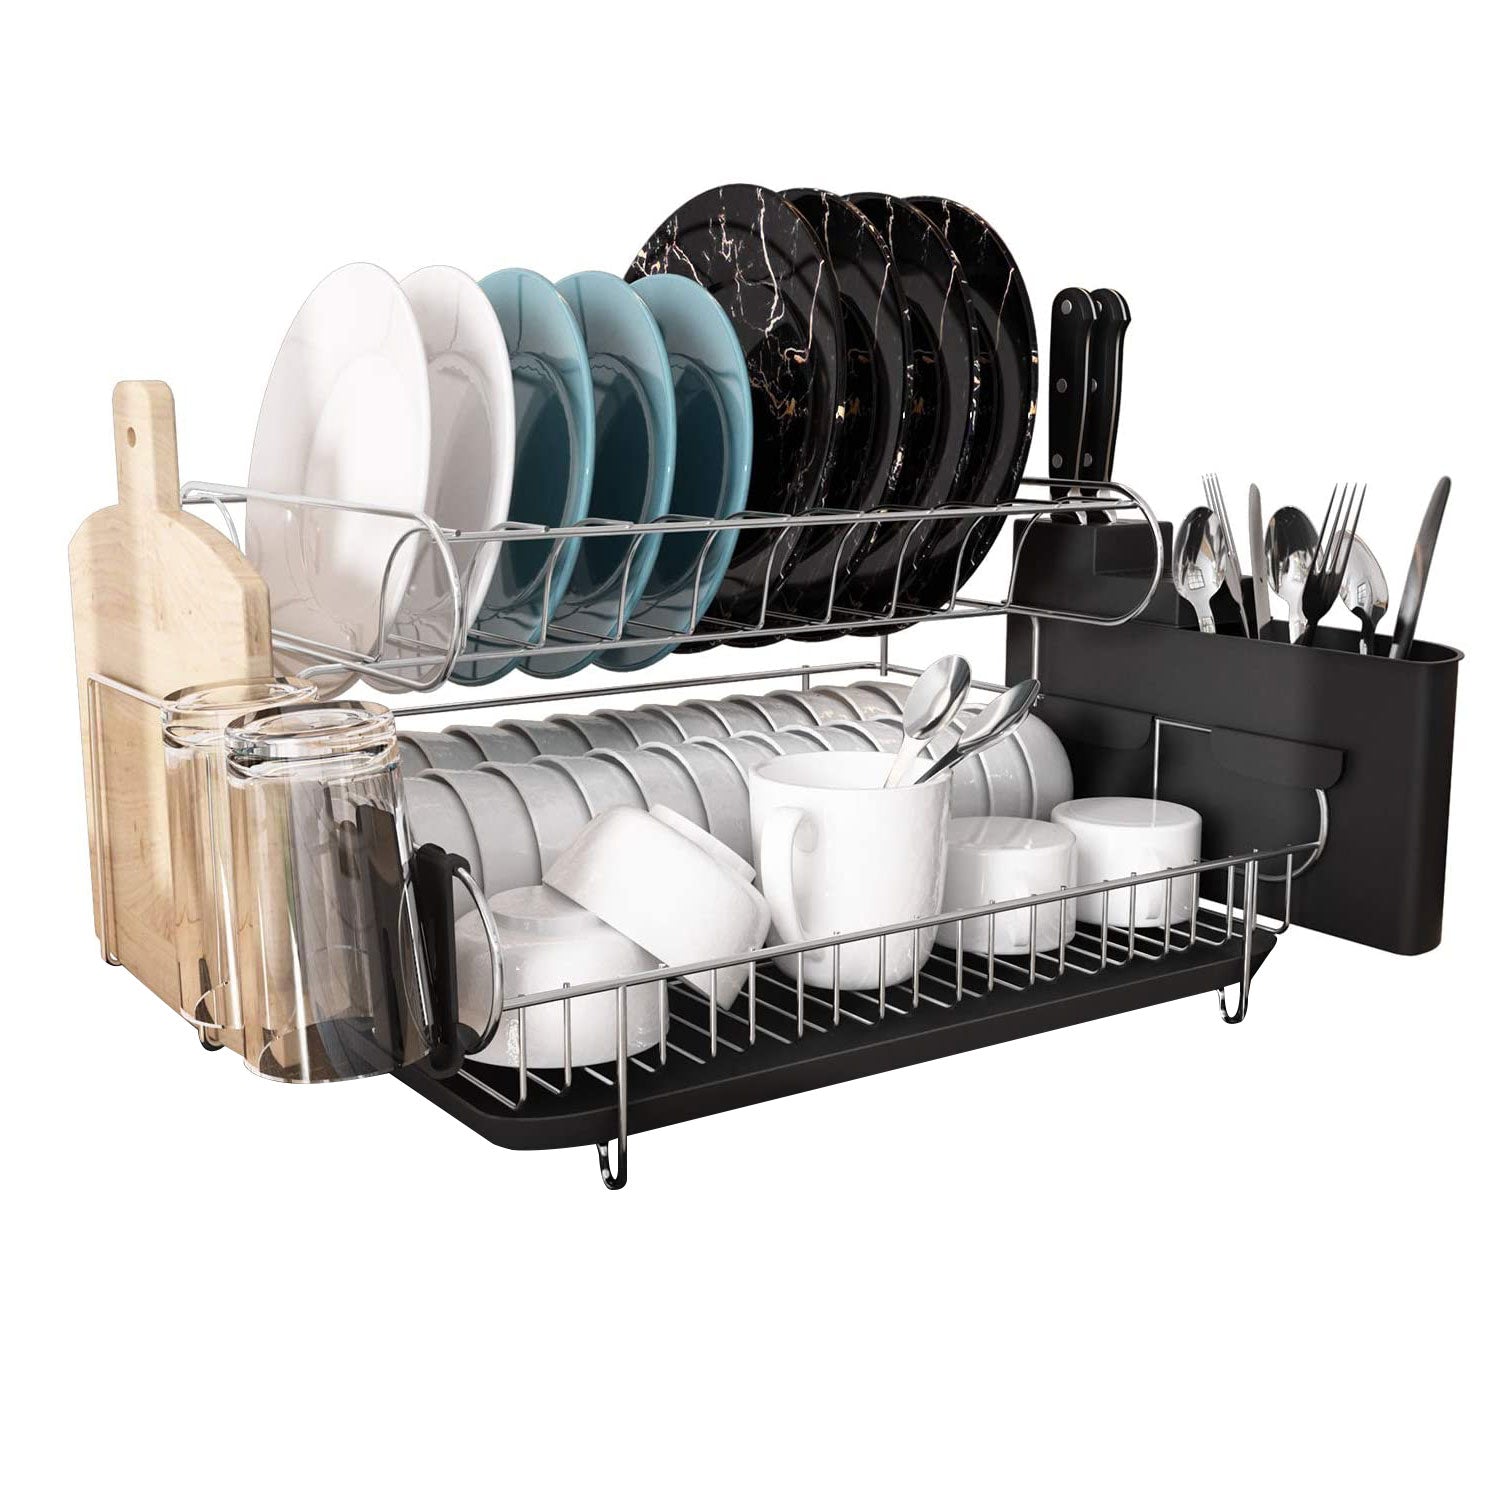 Dish Drying Rack Drainboard Set, 2 Tier Stainless Steel Large Dish